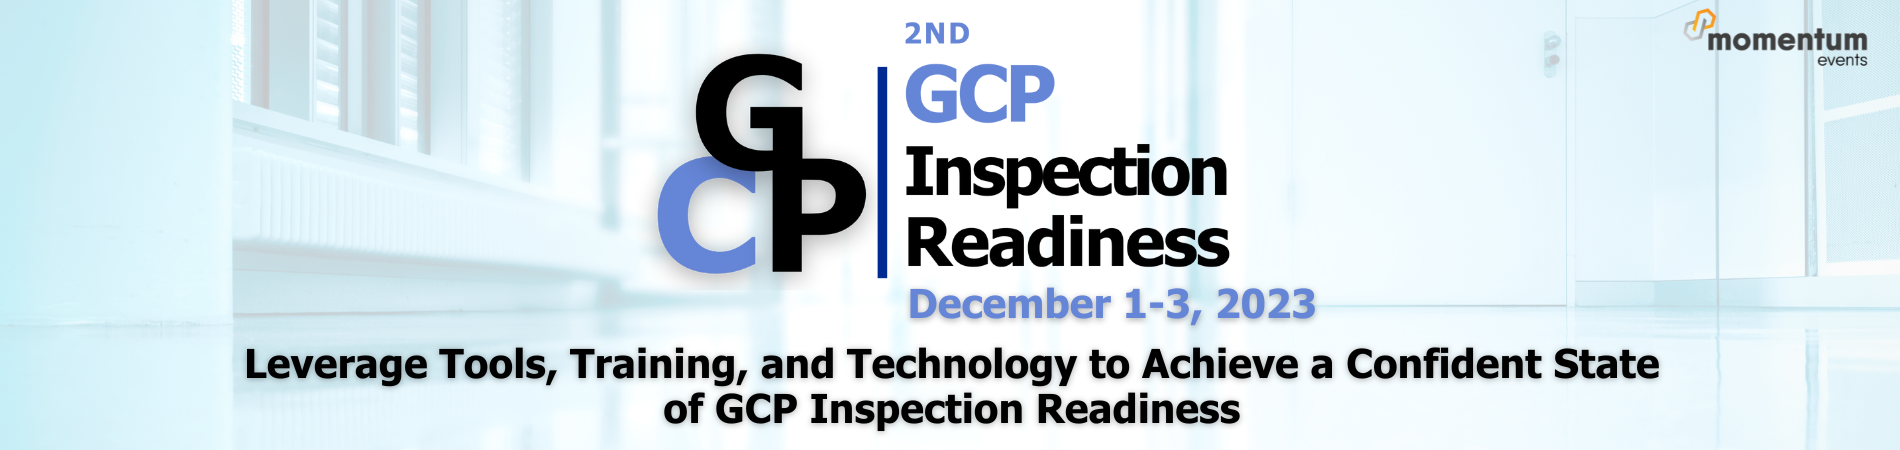 2nd GCP Inspection Readiness, December 1-3, 2023, Leverage Tools, Training, and Technology to Achieve a Confident State of GCP Inspection Readiness